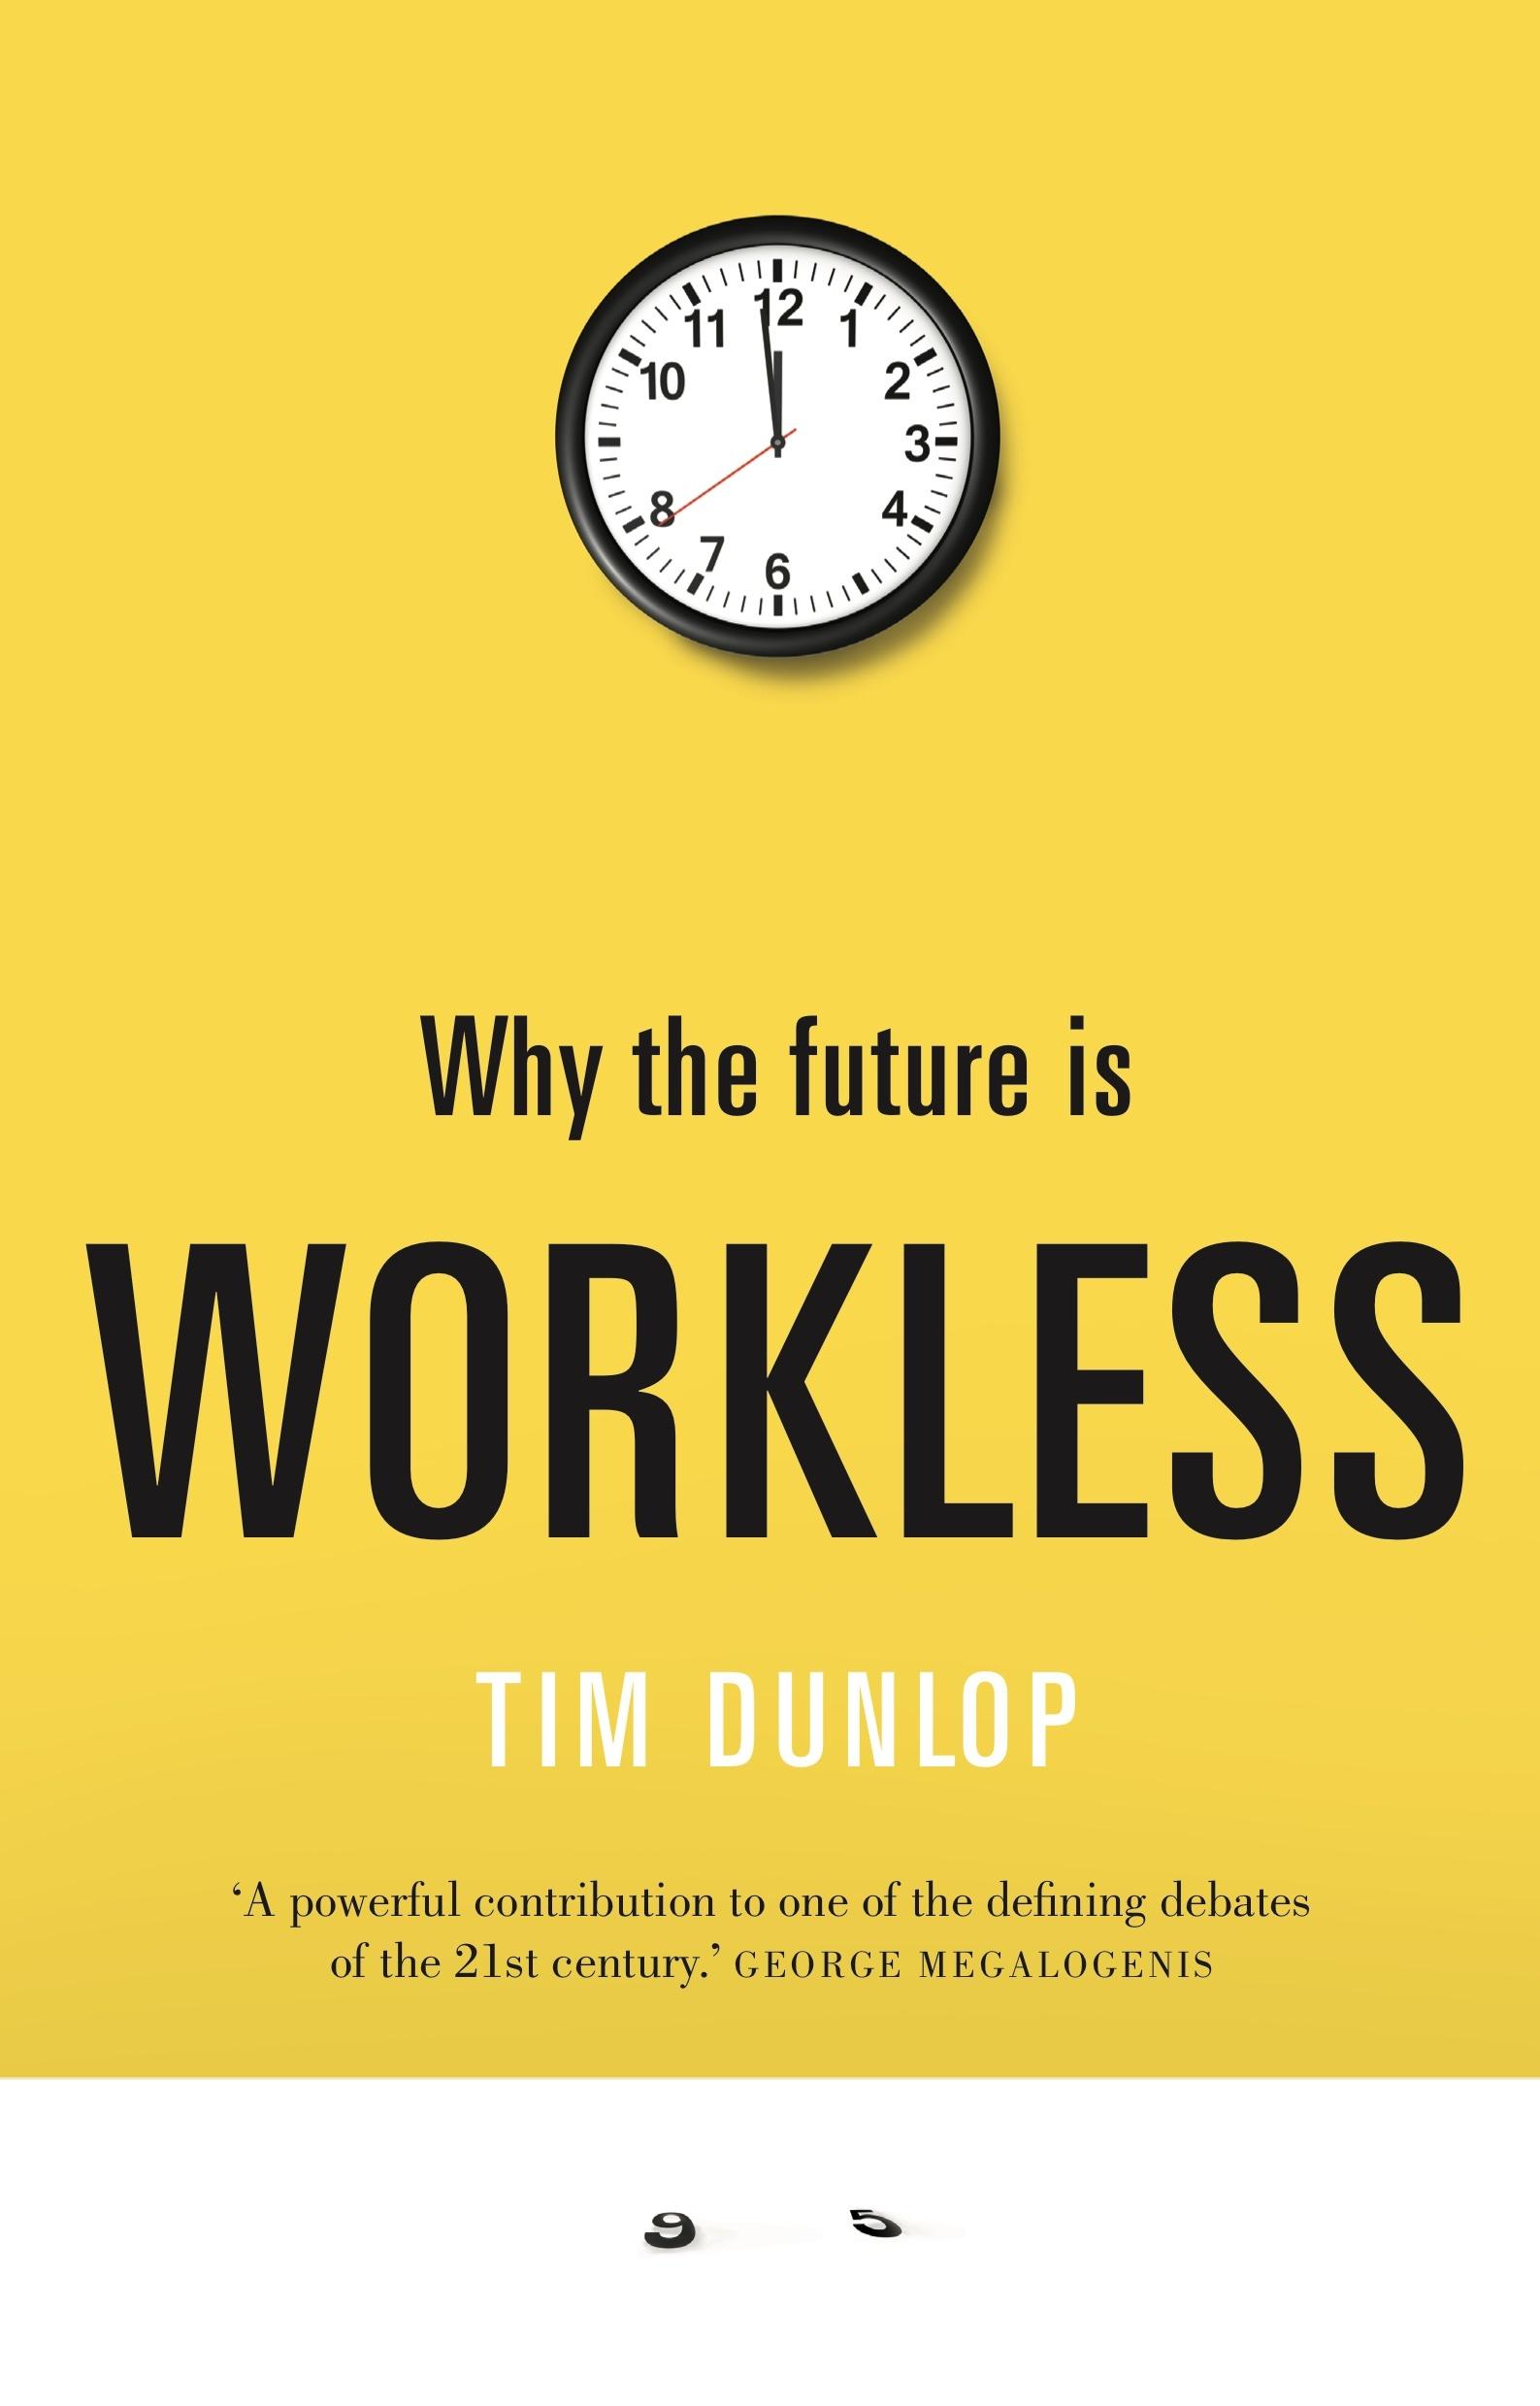 Why the future is workless